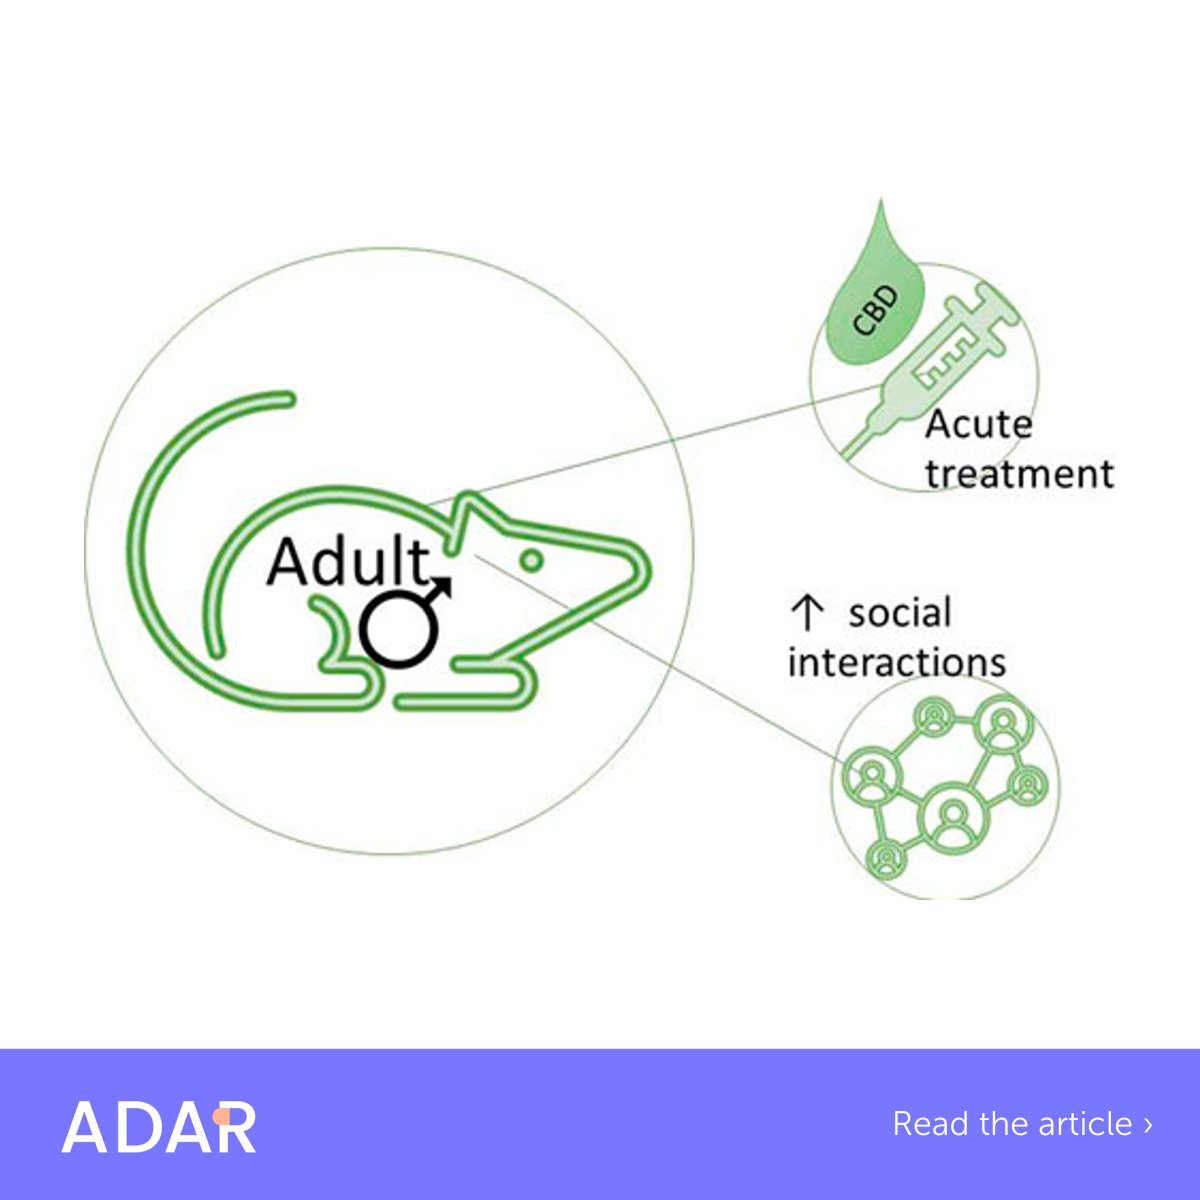 In the Inaugural Special Issue of @inrcmeeting & IDARS journal Advances in Drug and Alcohol Research, @UTHealthSA @wpunj_edu scientists demonstrate how #cannabindol or #CBD enhances social interactions between male mice 🐭🐭. Read on to learn more! fro.ntiers.in/ADAR-11163